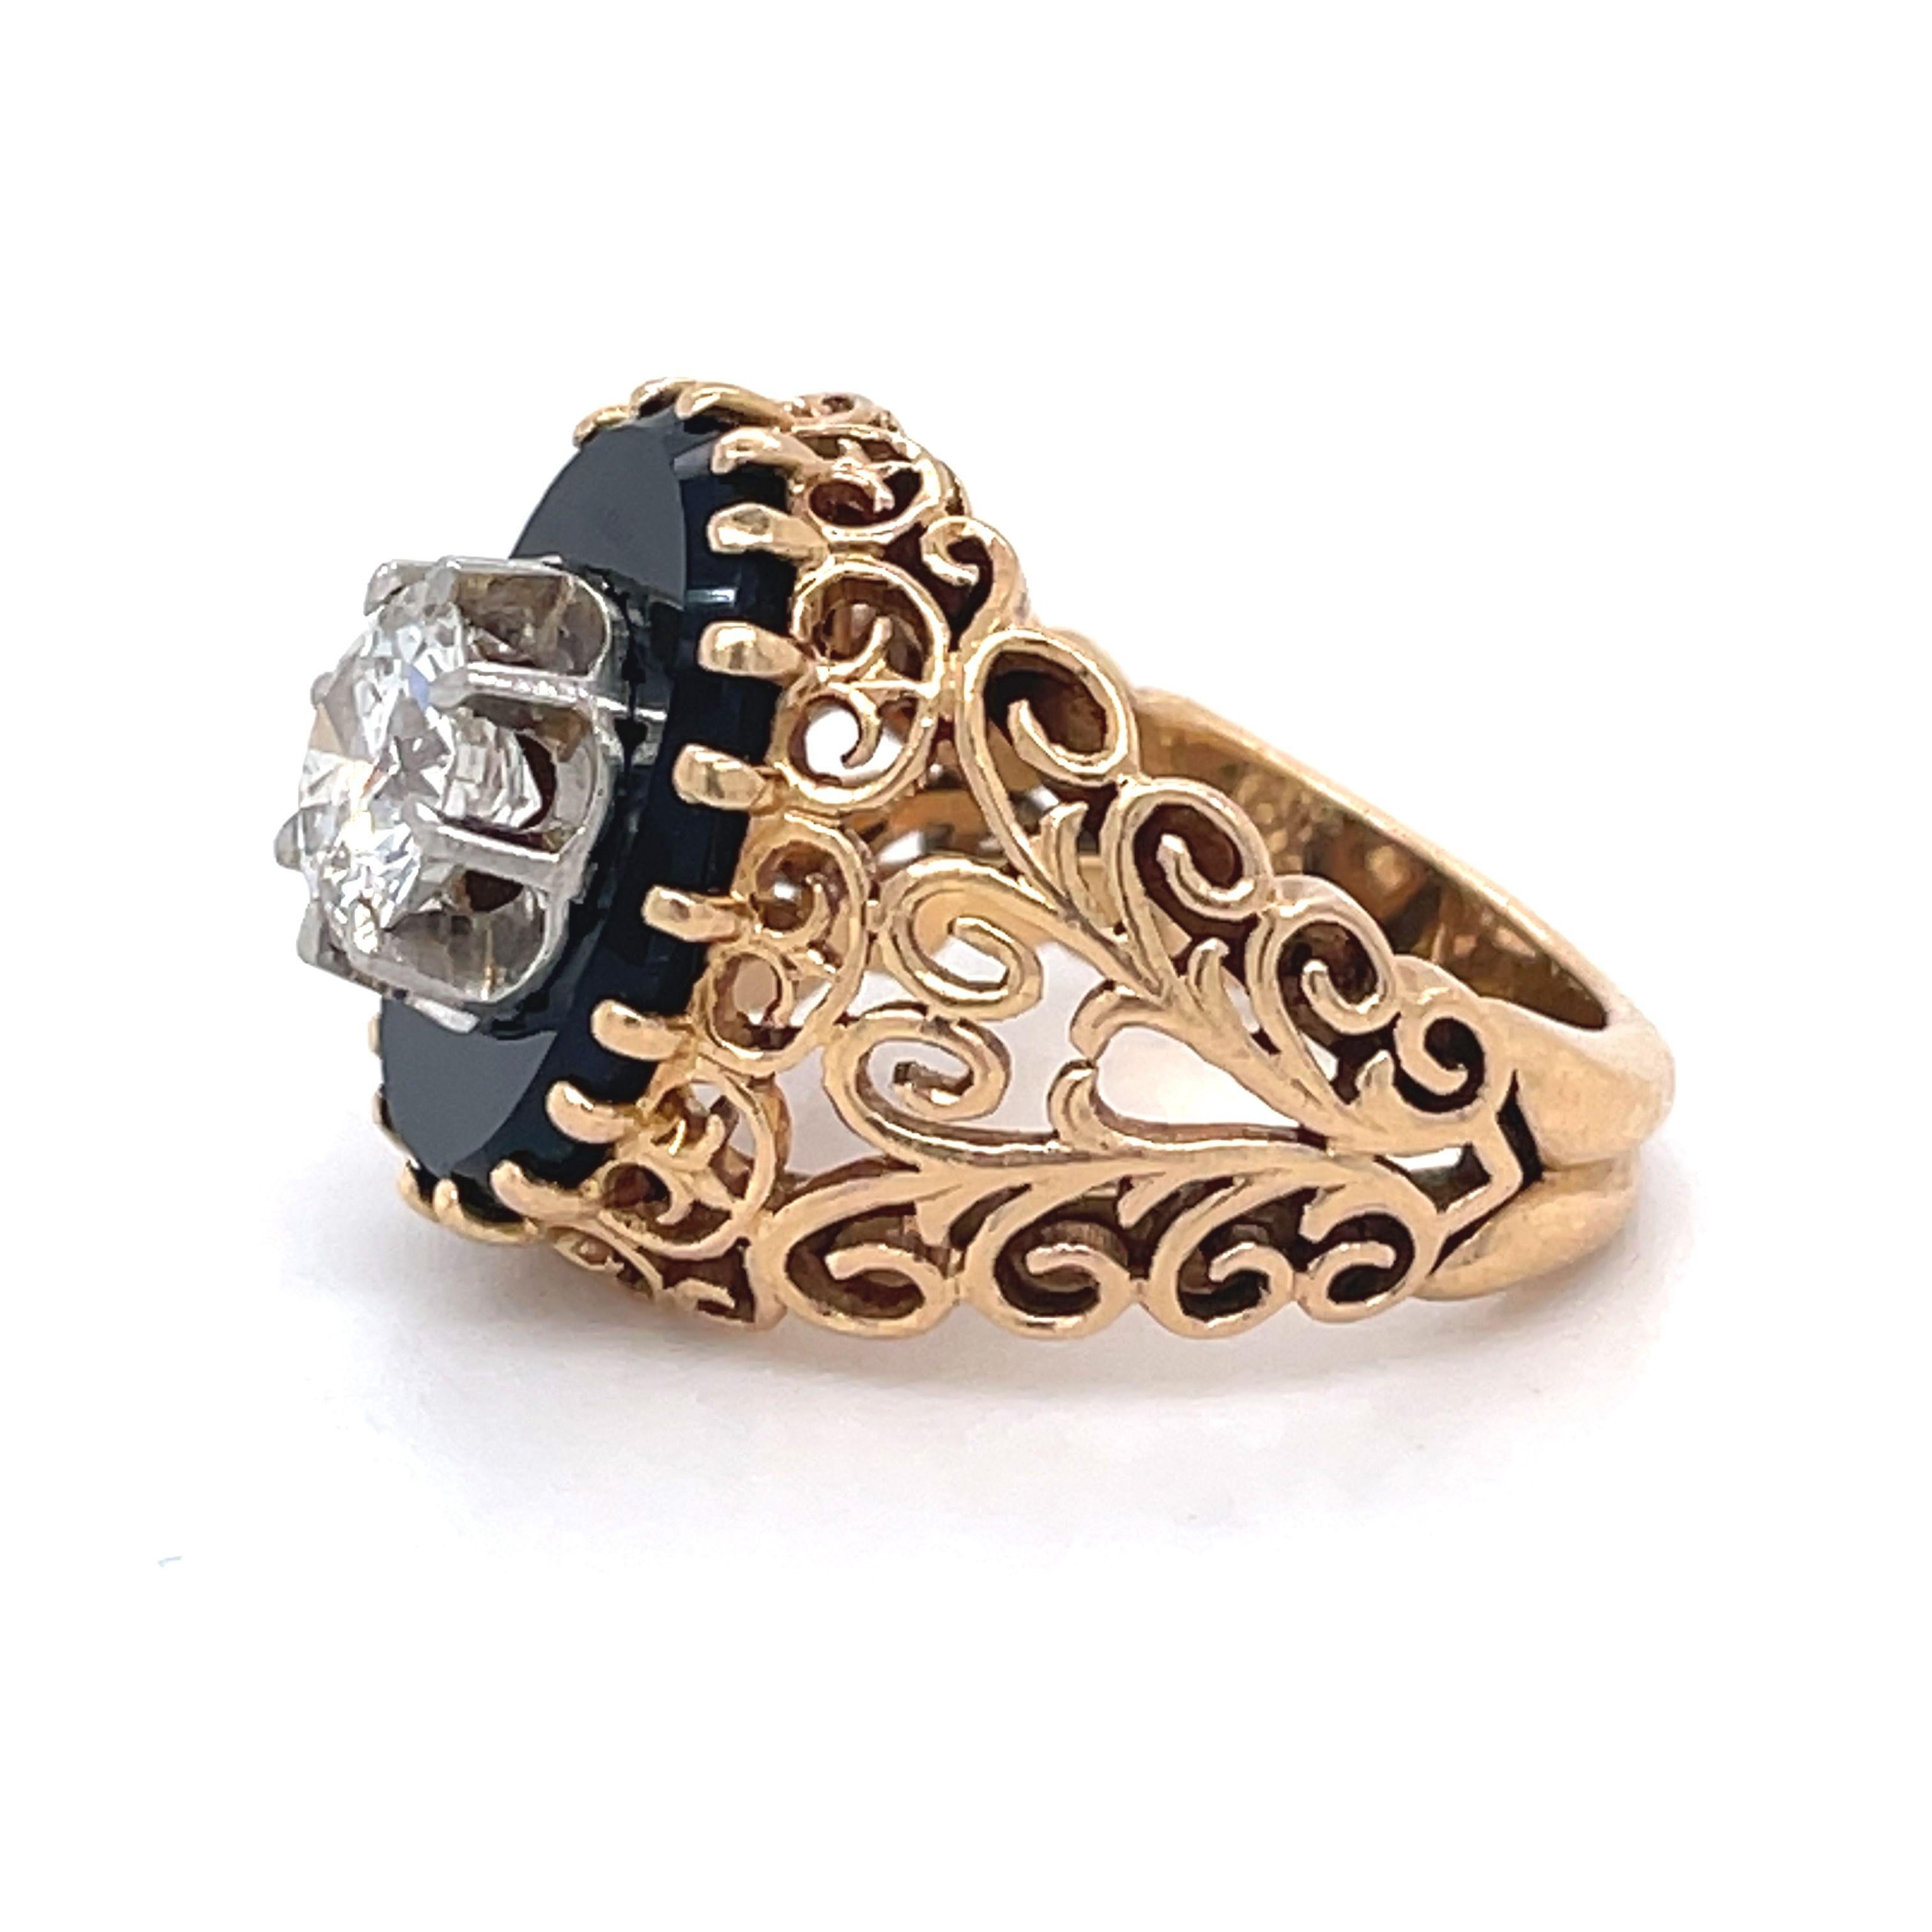 Round Cut Filigree Ring- Vintage Onyx and Diamond Ring, 1ct Round Diamond, 18k Yellow Gold For Sale